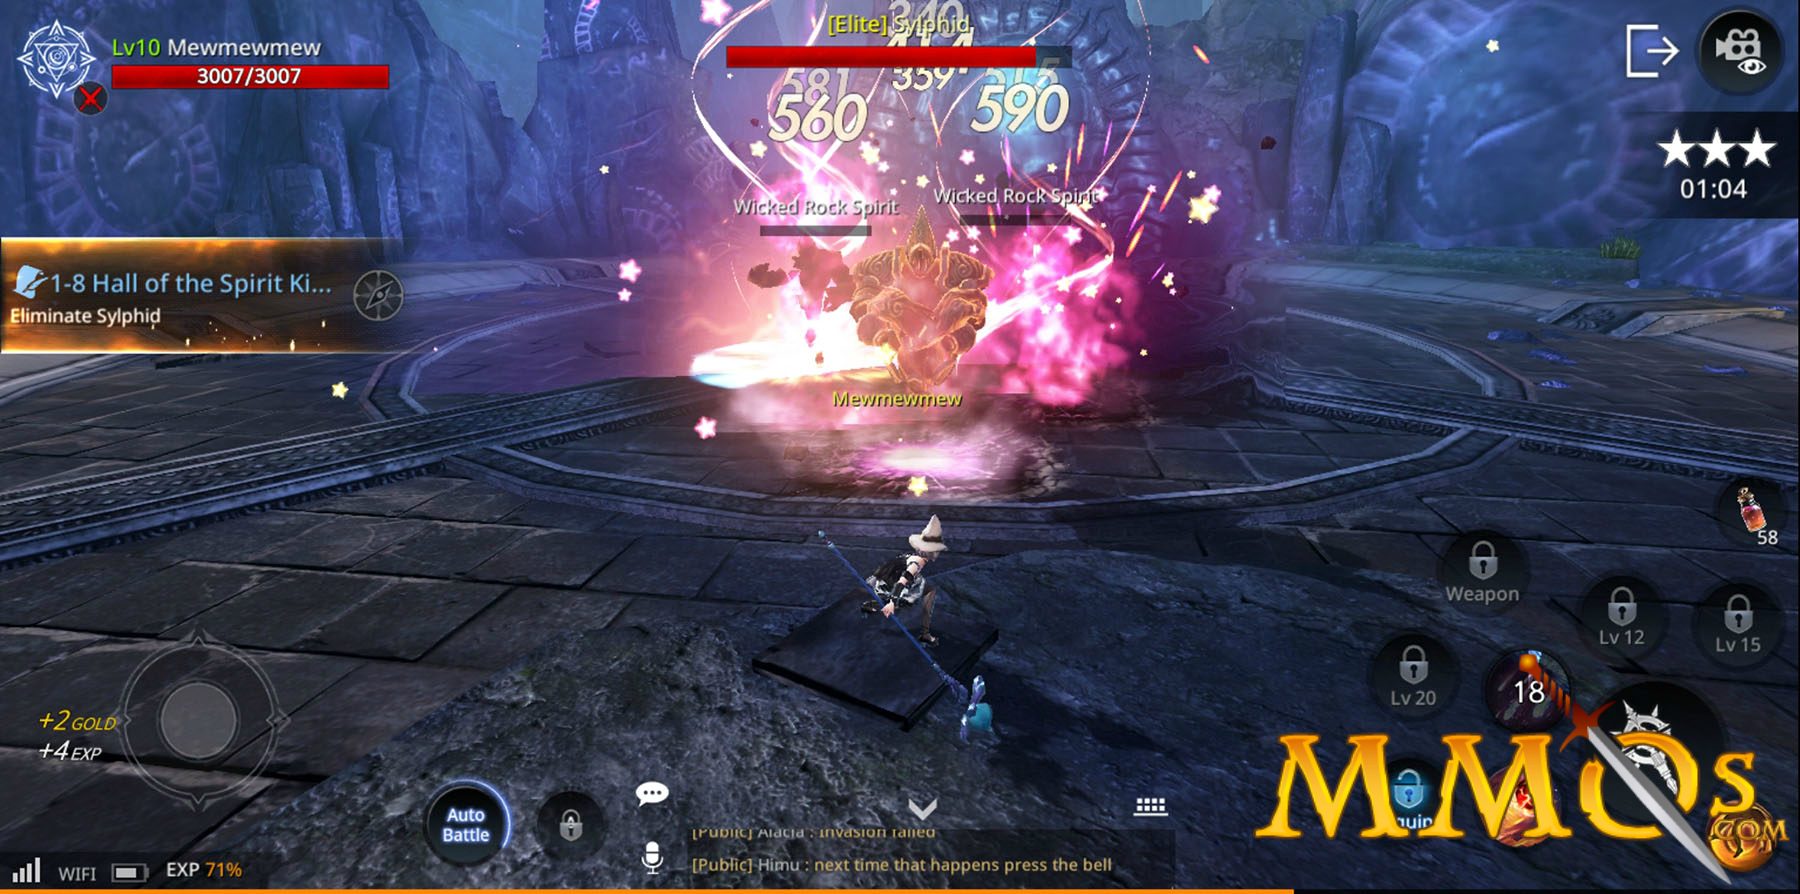 AxE: Alliance vs Empire Review - A mobile MMORPG worth grinding for? -  Droid Gamers